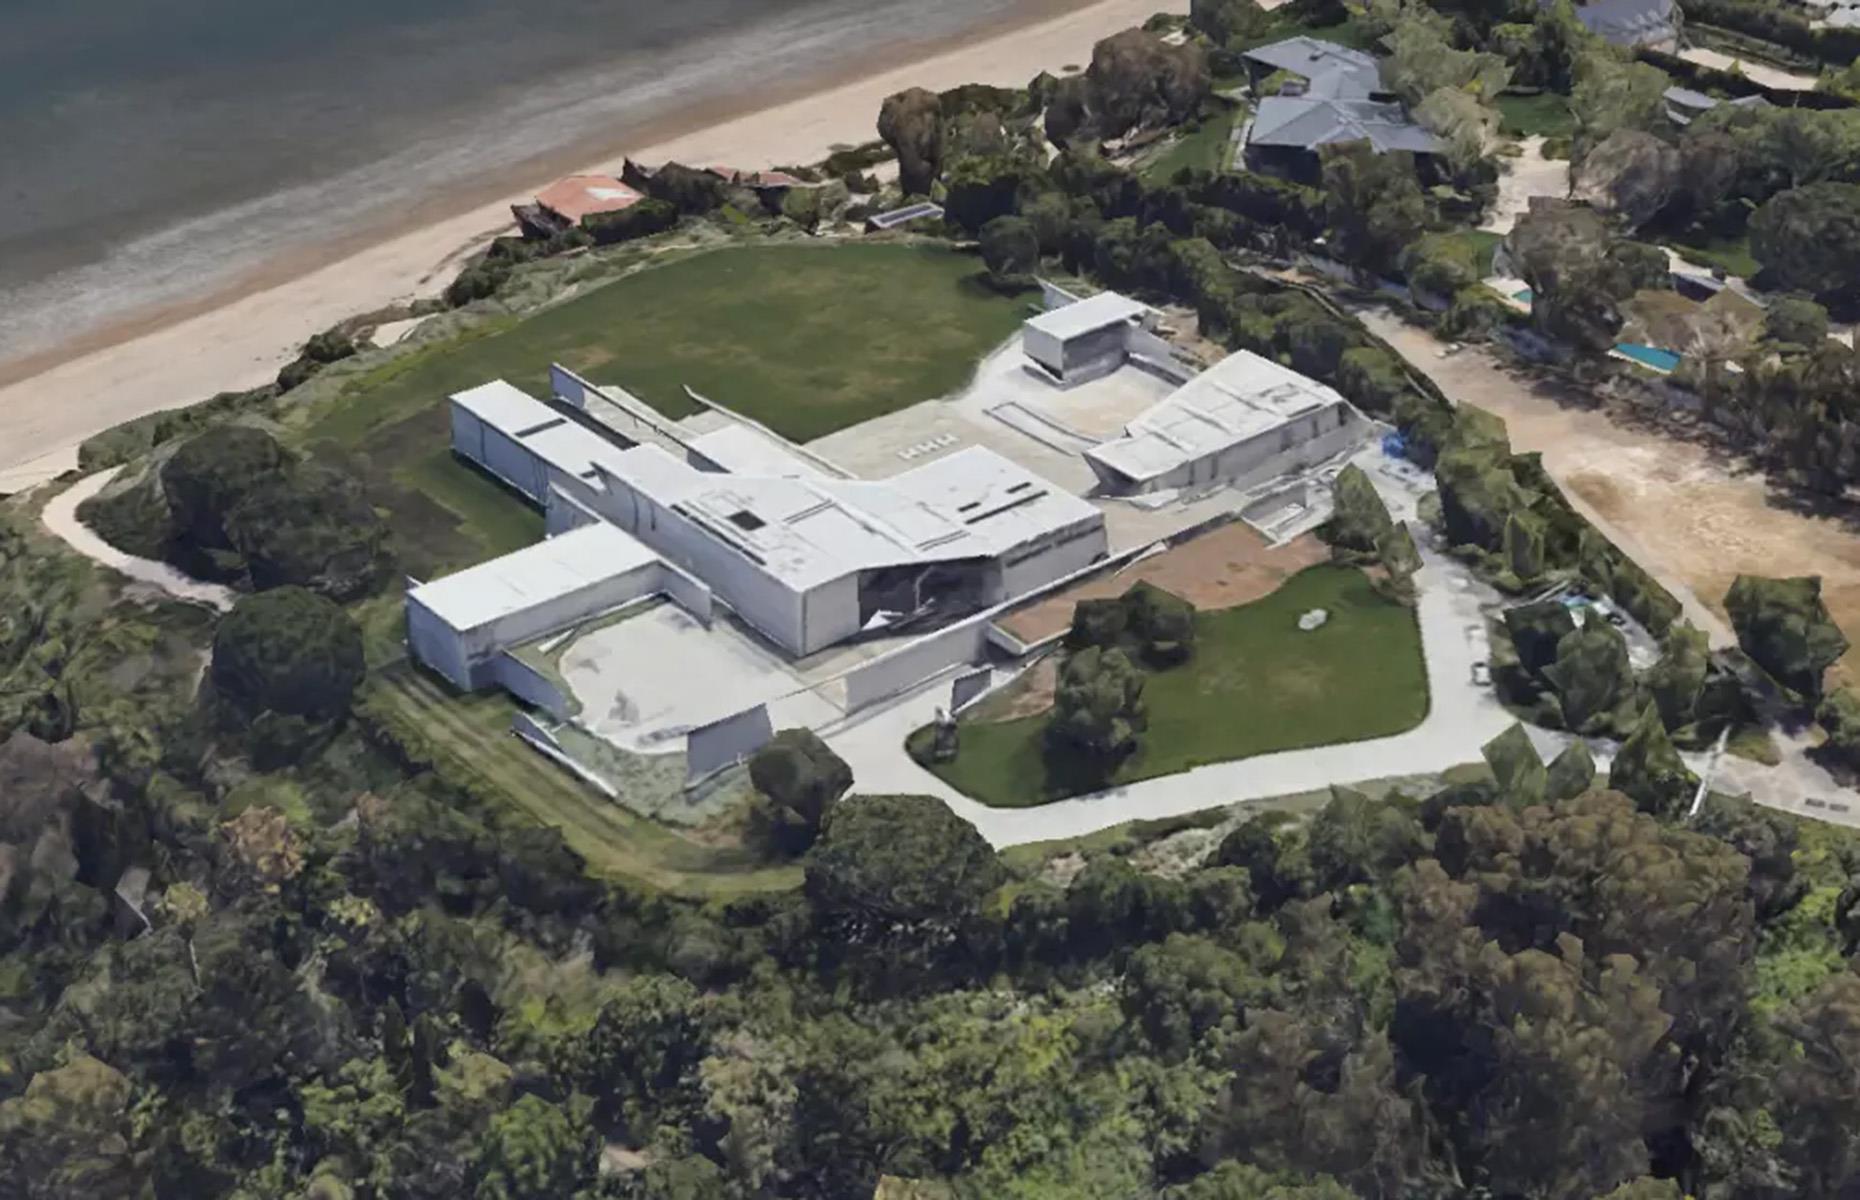 <p>Beyoncé and Jay-Z own a seriously impressive real estate portfolio, which includes lavish residences in New York, New Orleans, the Hamptons, Miami Beach, and Los Angeles.</p>  <p>However, the crown jewel of their collection is a sprawling $200 million mega-mansion overlooking the ocean in Malibu (pictured). The power couple's recent acquisition set a record for the highest price ever paid for a home in California, surpassing their new neighbor, billionaire venture capitalist Marc Andreessen, who purchased the adjacent property for $177 million in 2021.</p>  <p>Designed by renowned architect Tadao Ando, the mansion features a minimalist design characterized by its extensive use of concrete and glass. Not everyone has been complimentary about its bold design, though, with some people comparing the concrete mansion to a supervillain's lair.</p>